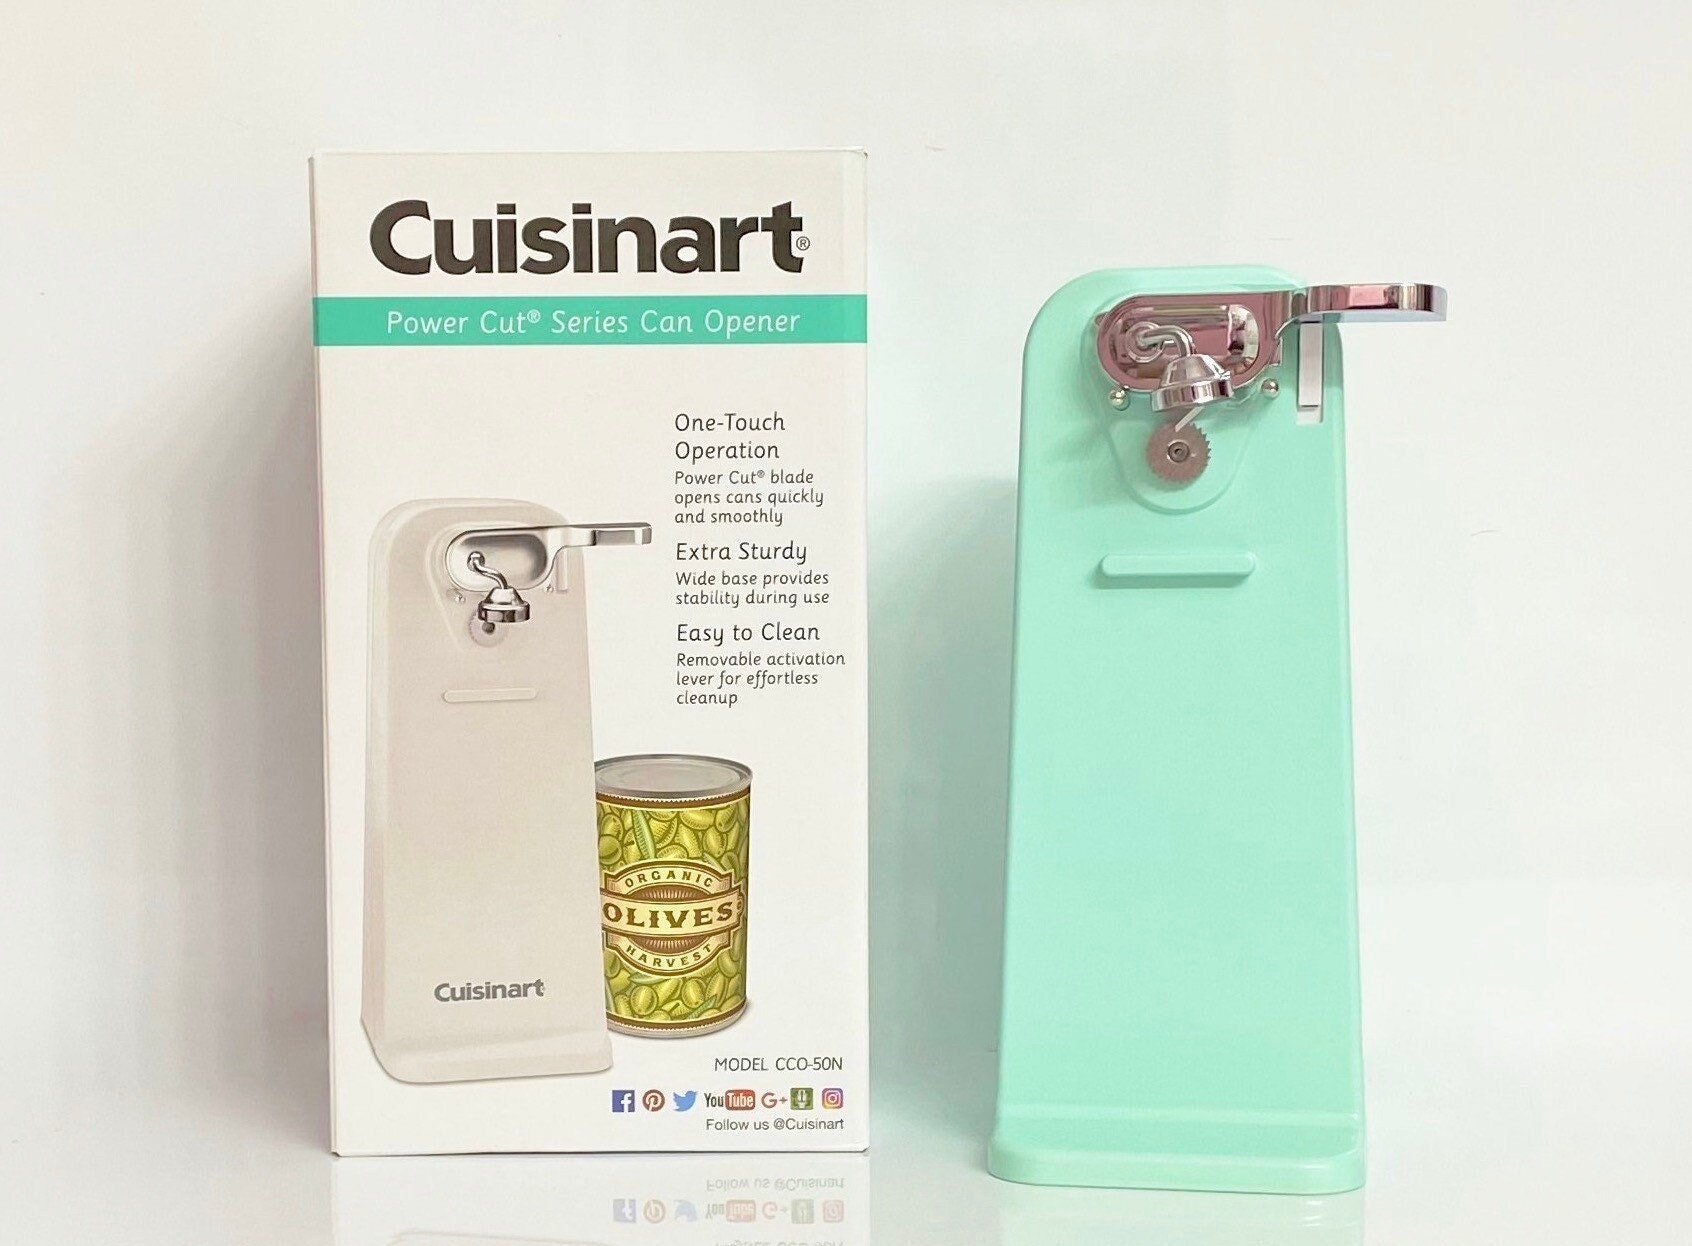 Hamilton Beach Extra-Tall Can Opener with Removable Cutting Lever